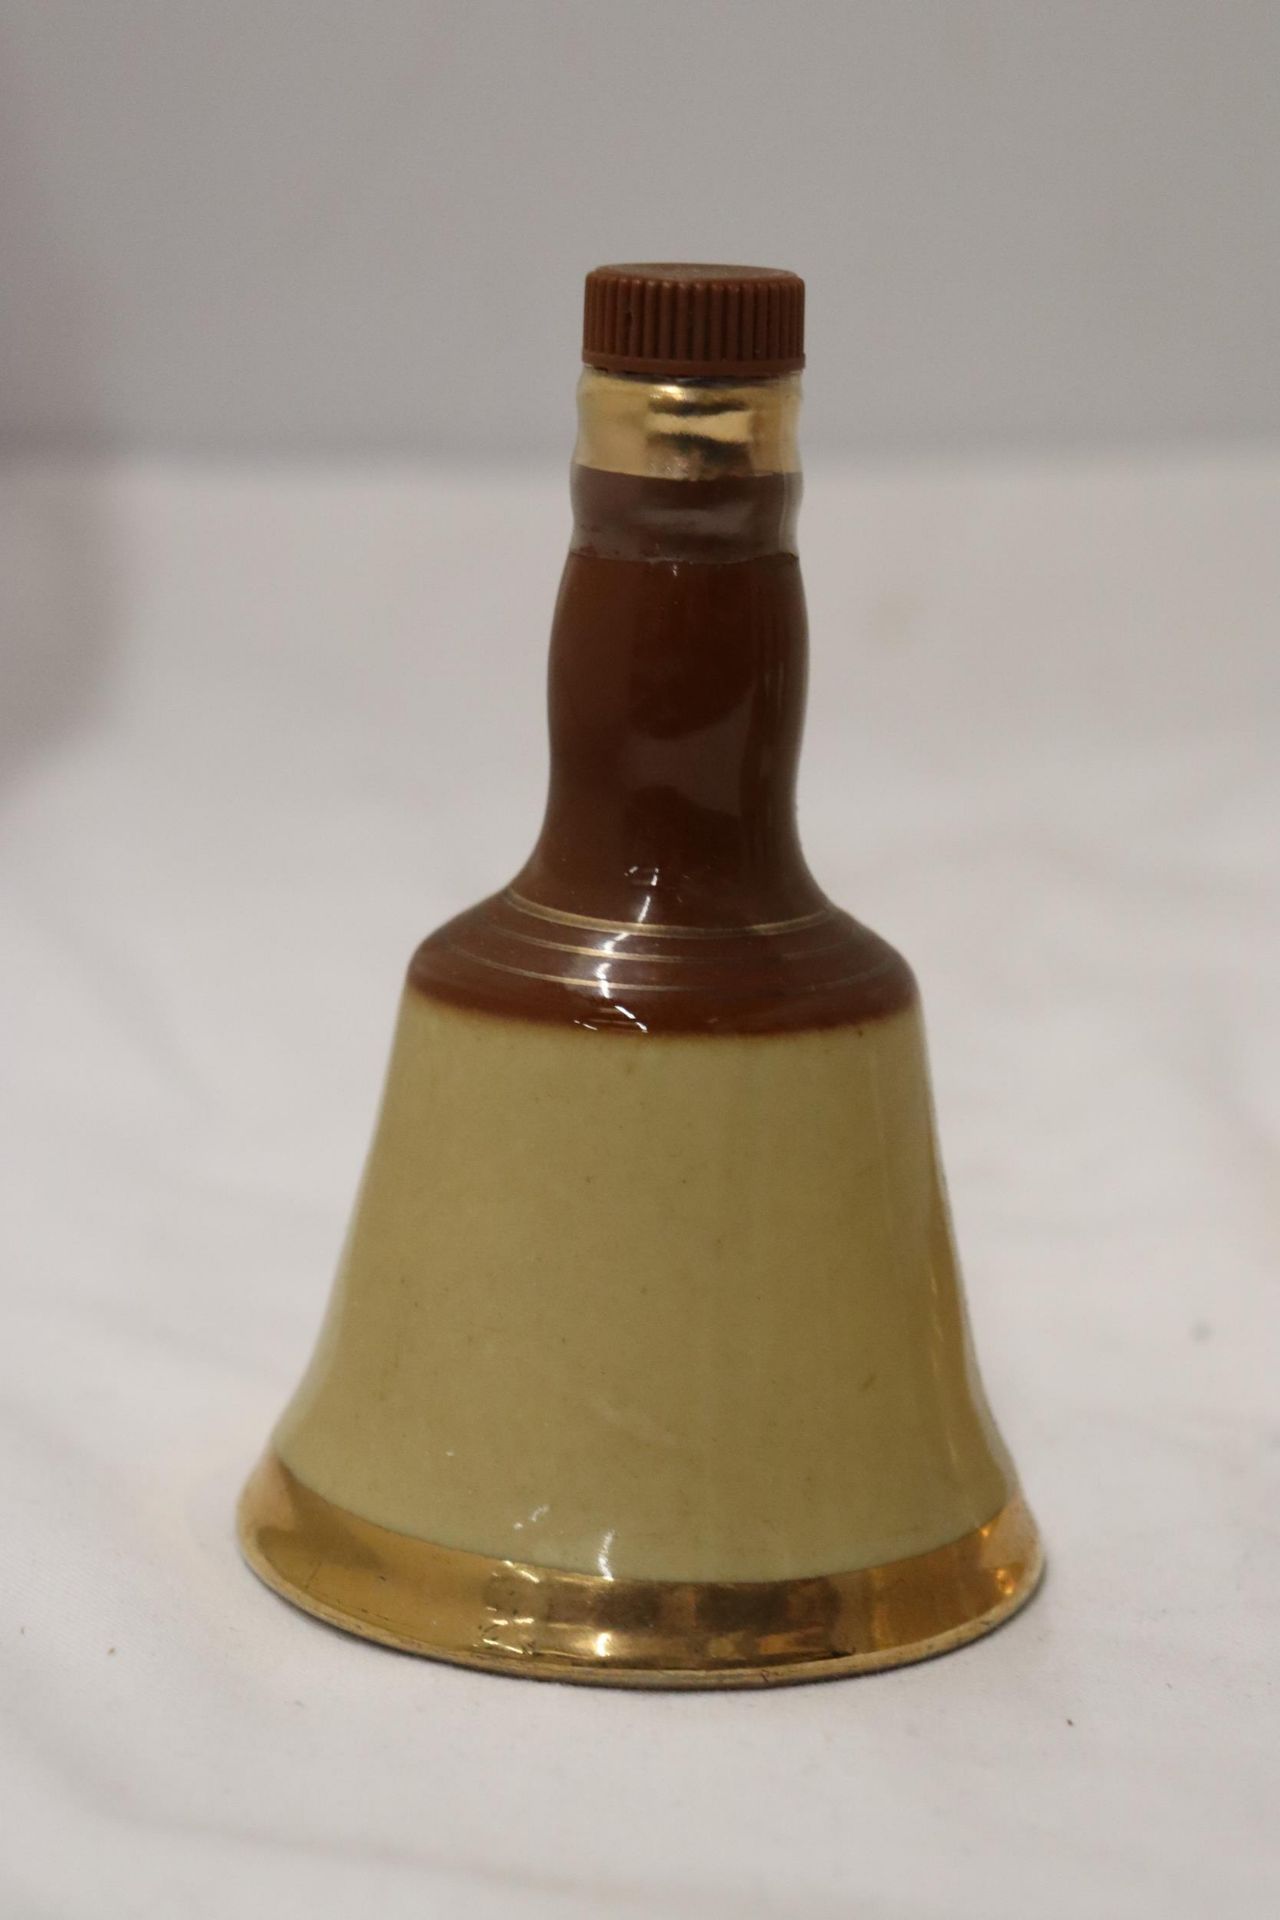 ONE LARGE AND THREE SMALL, BELL'S WHISKY CERAMIC DECANTERS - Image 4 of 8